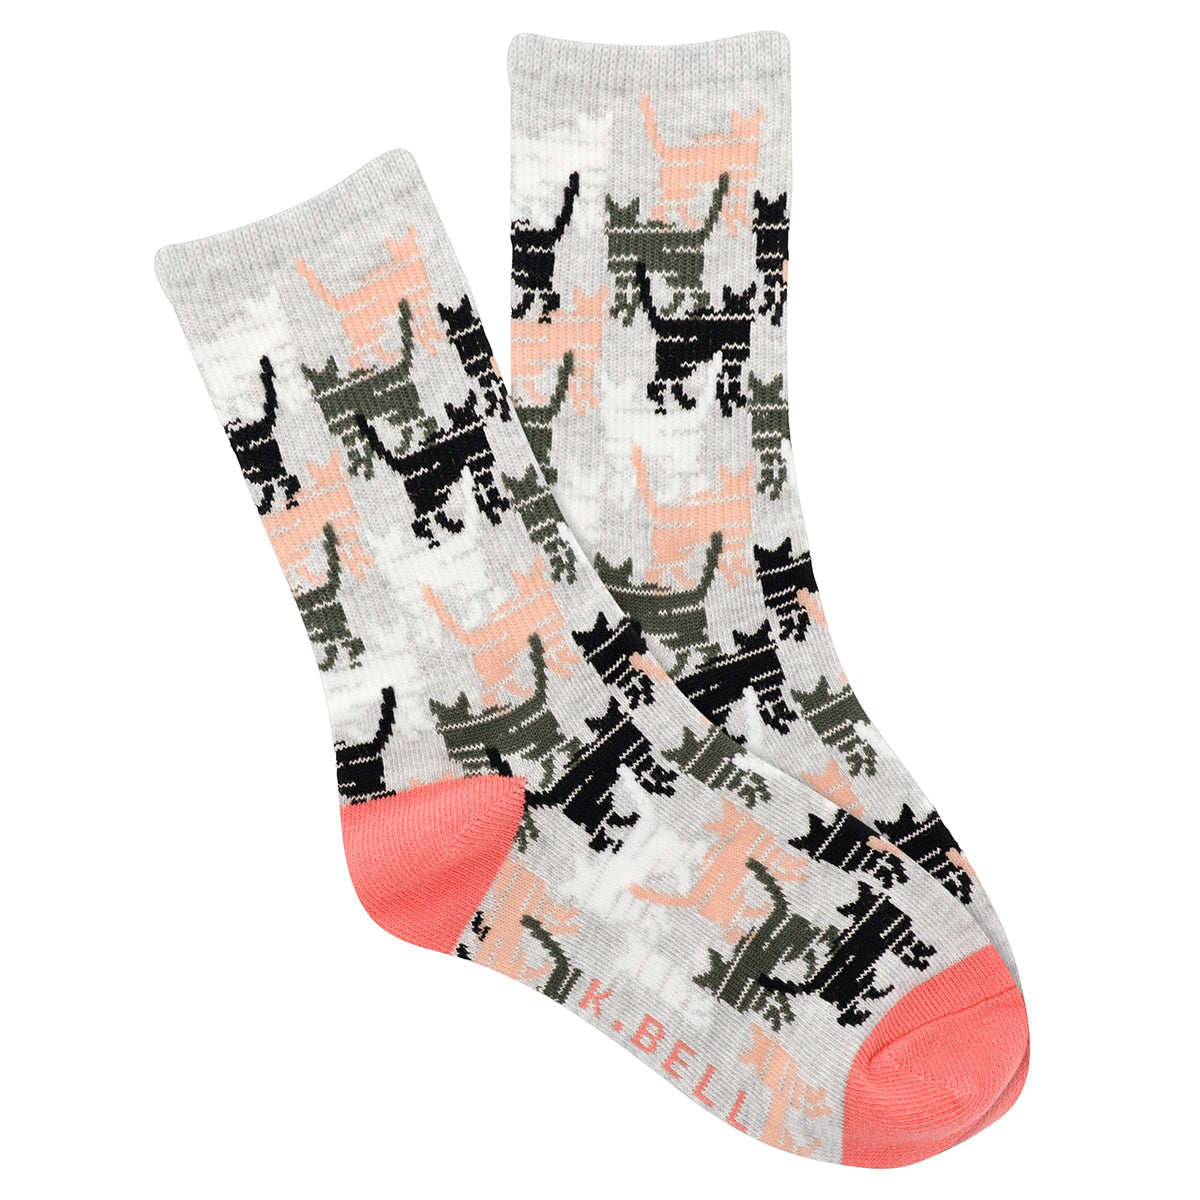 A pair of K. Bell Socks Kids Crew Kitty Camo camouflage-patterned crew socks with coral toe and heel accents.